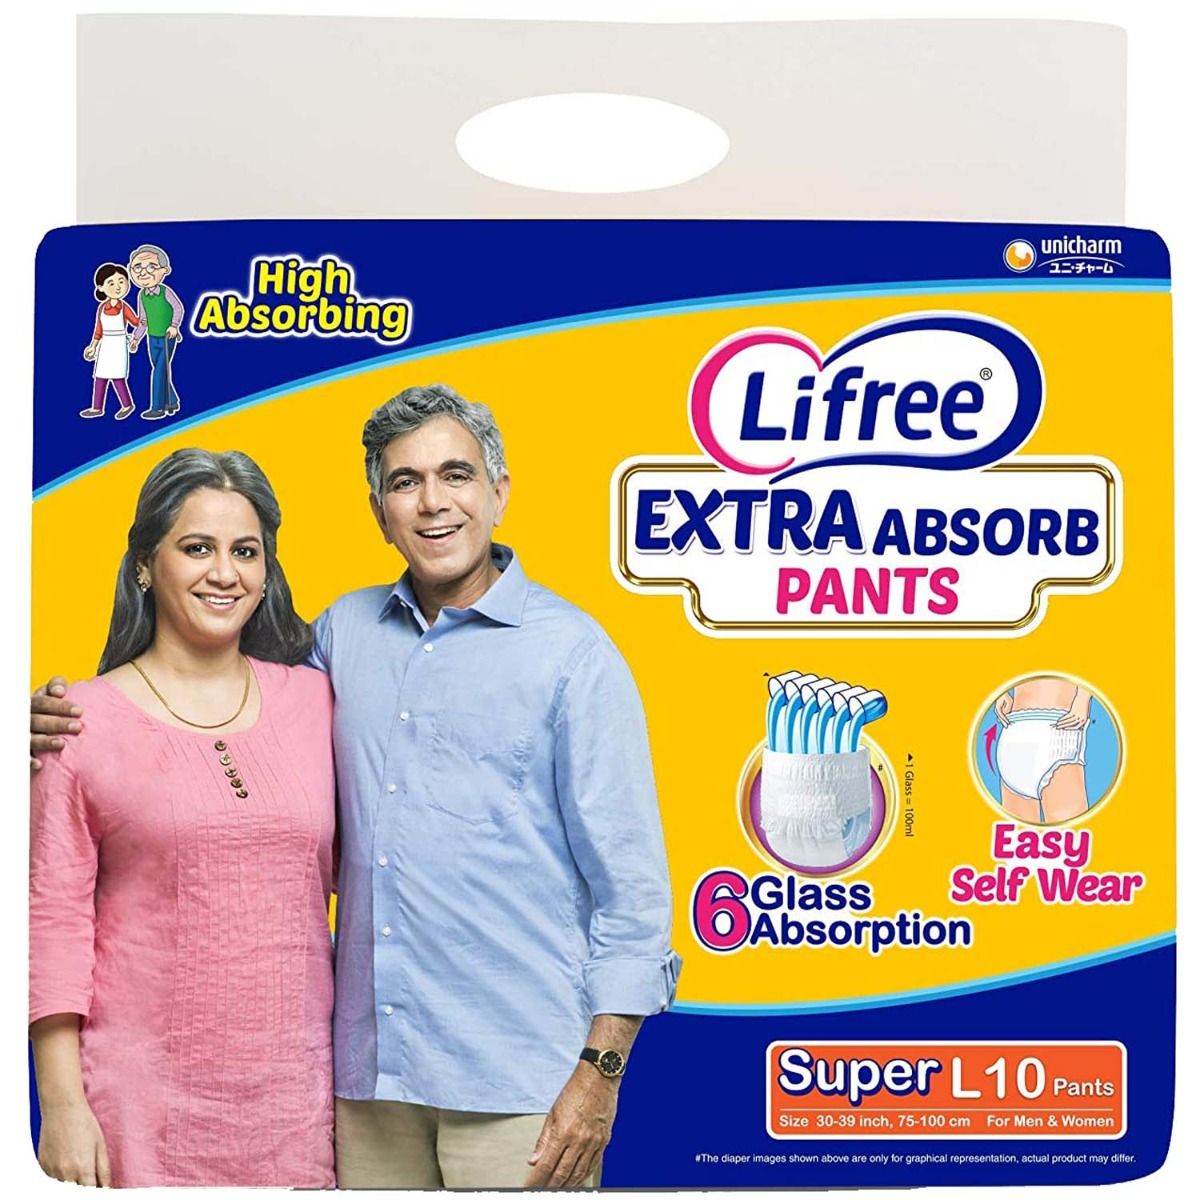 Lifree Extra Absorbent Adult Diaper Pants Large, 10 Count, Pack of 1 